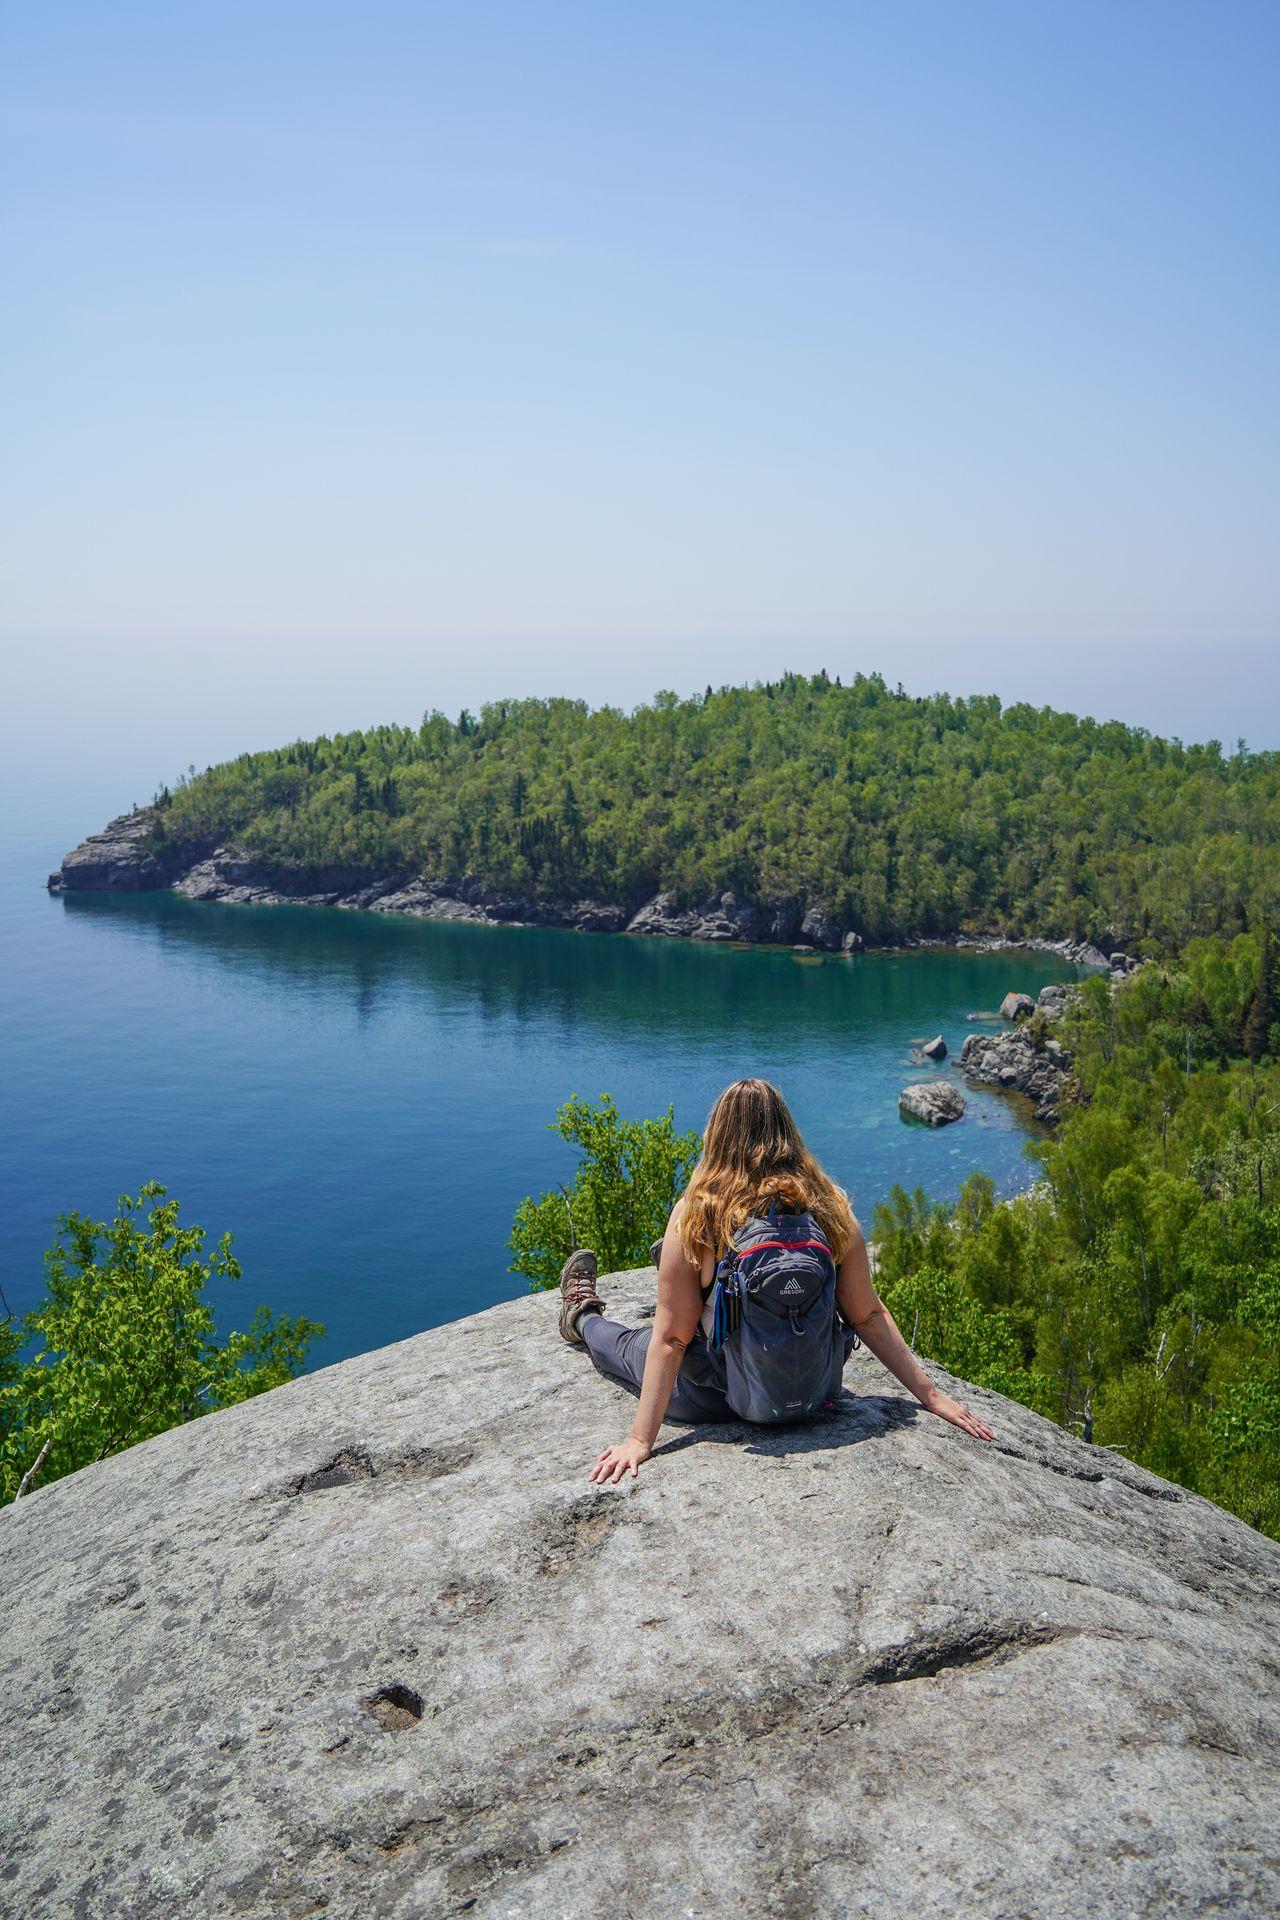 Lydia sitting on a rock and looking out at Lake Superior and a peninsula extending out into the water.